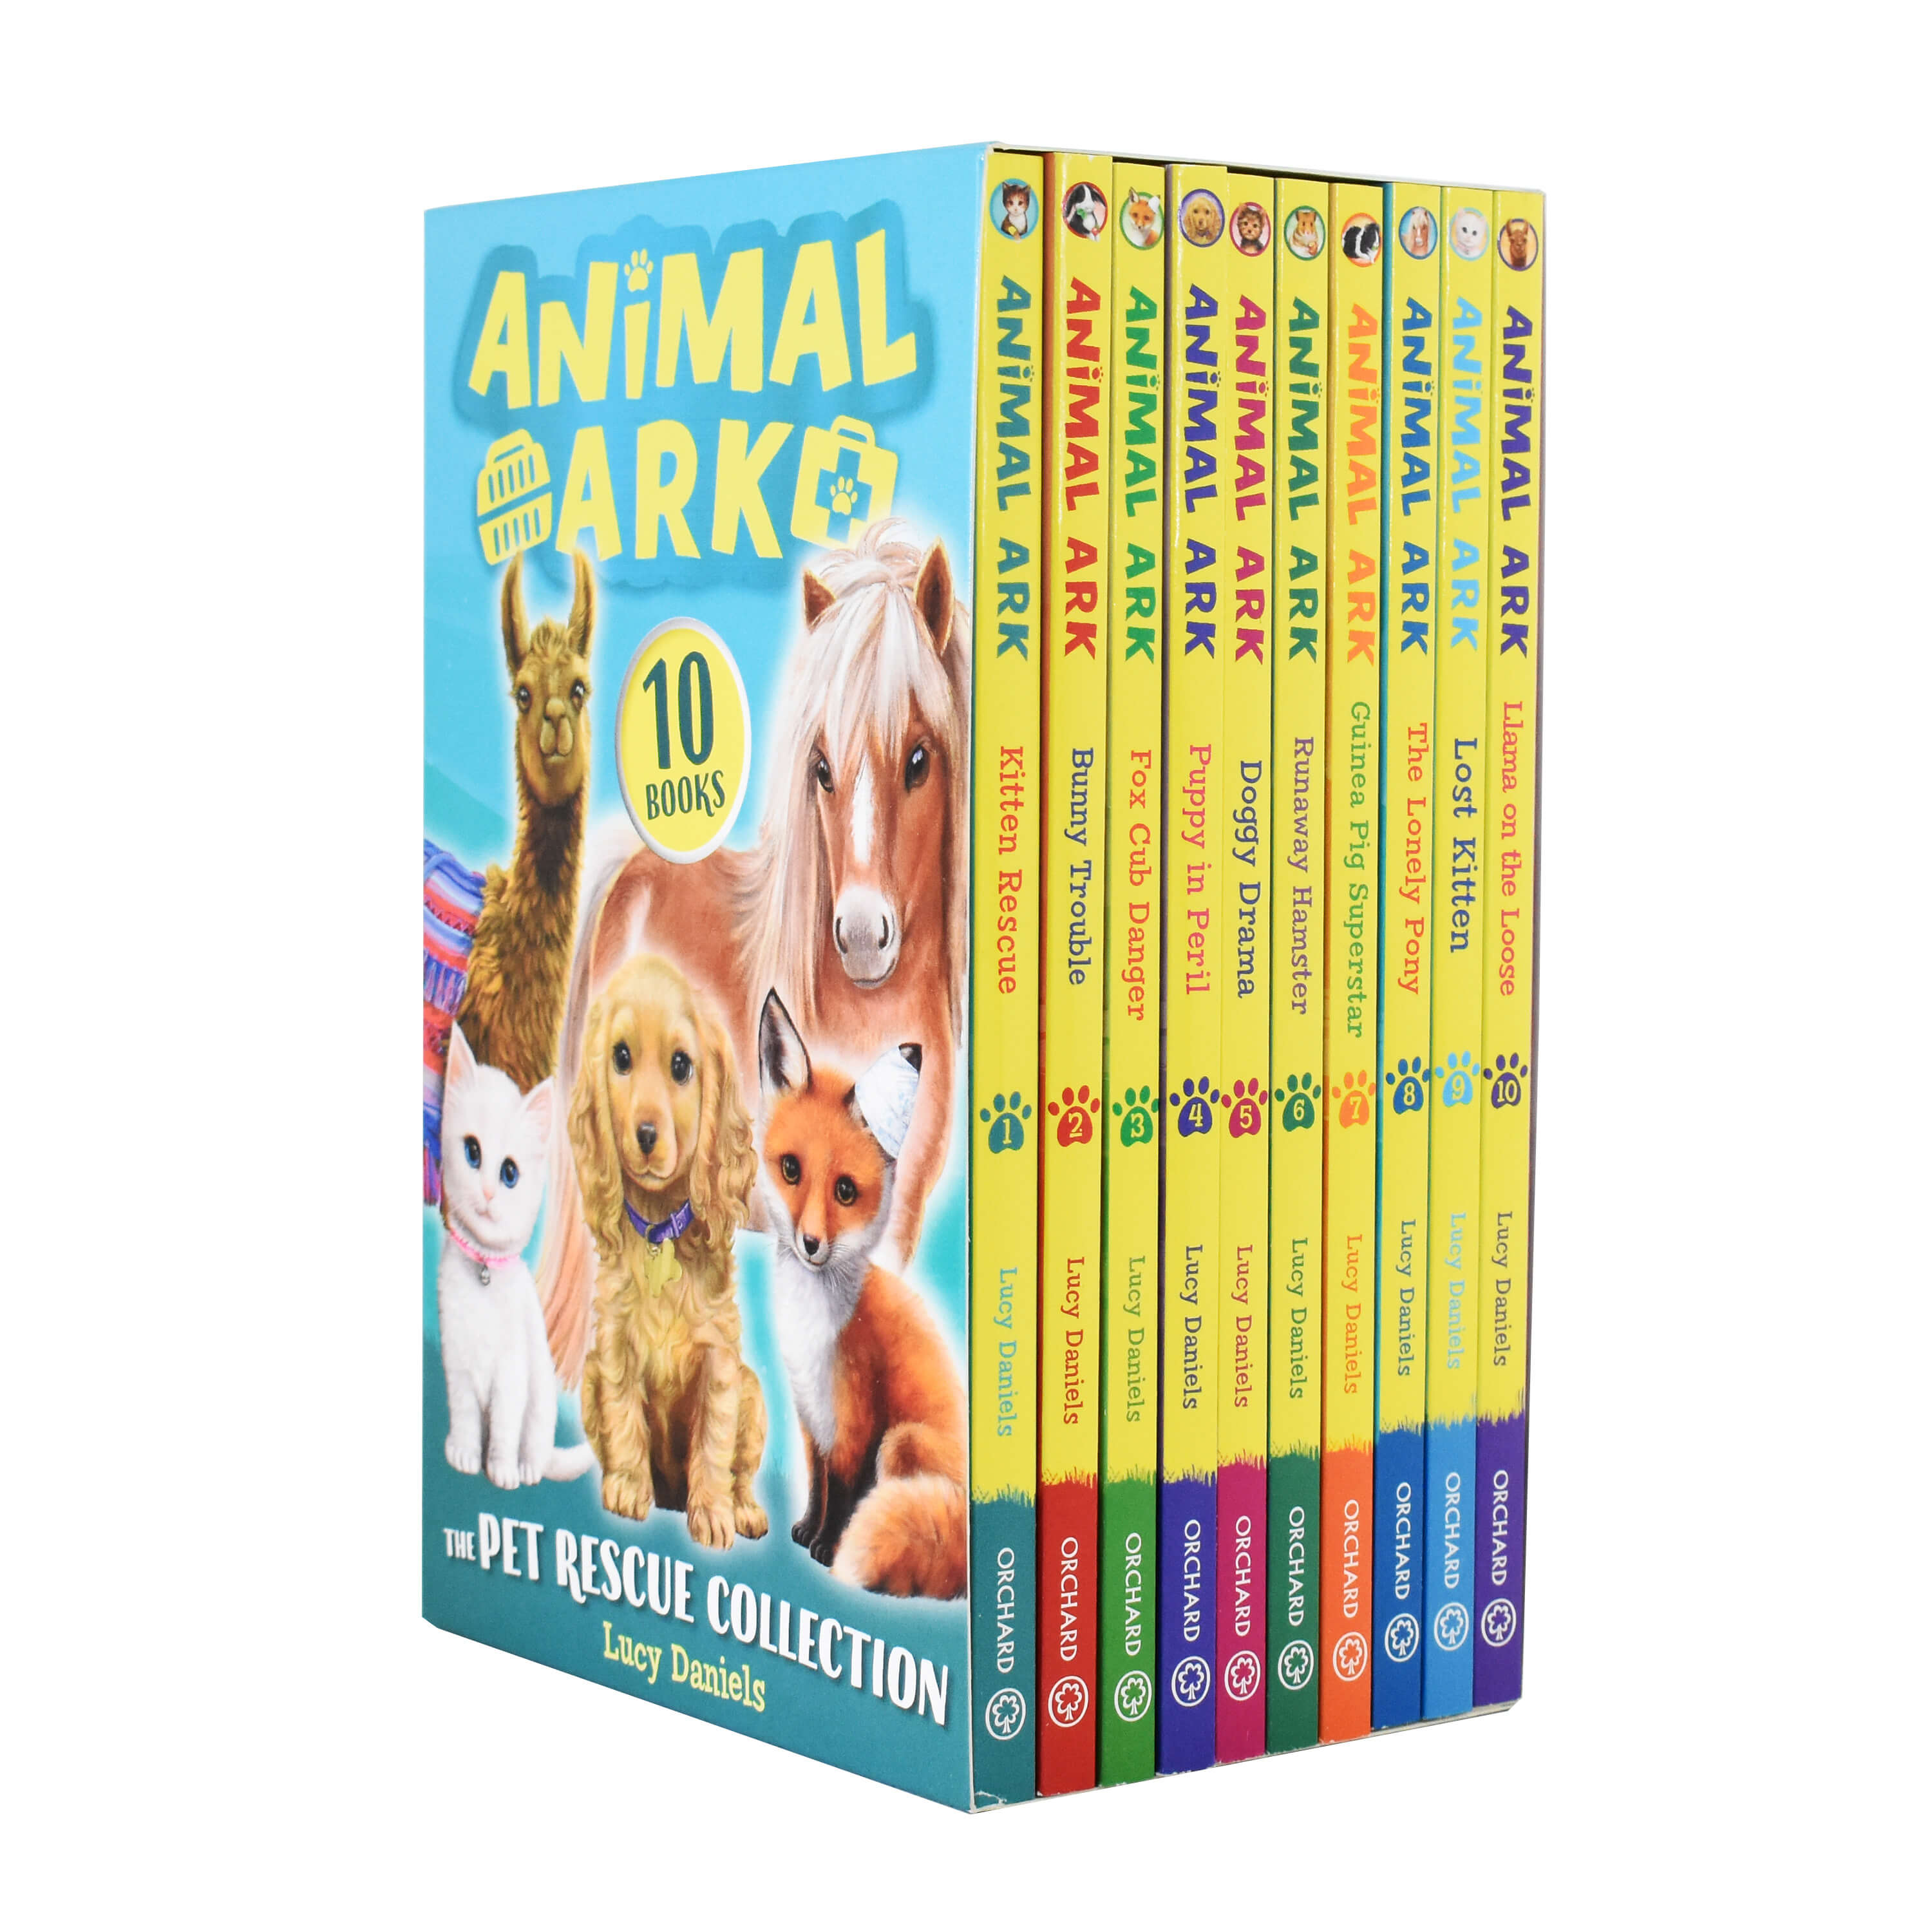 Animal Ark The Pet Rescue Collection 10 Book Box Set by Lucy Daniels - Age 7-9 - Paperback